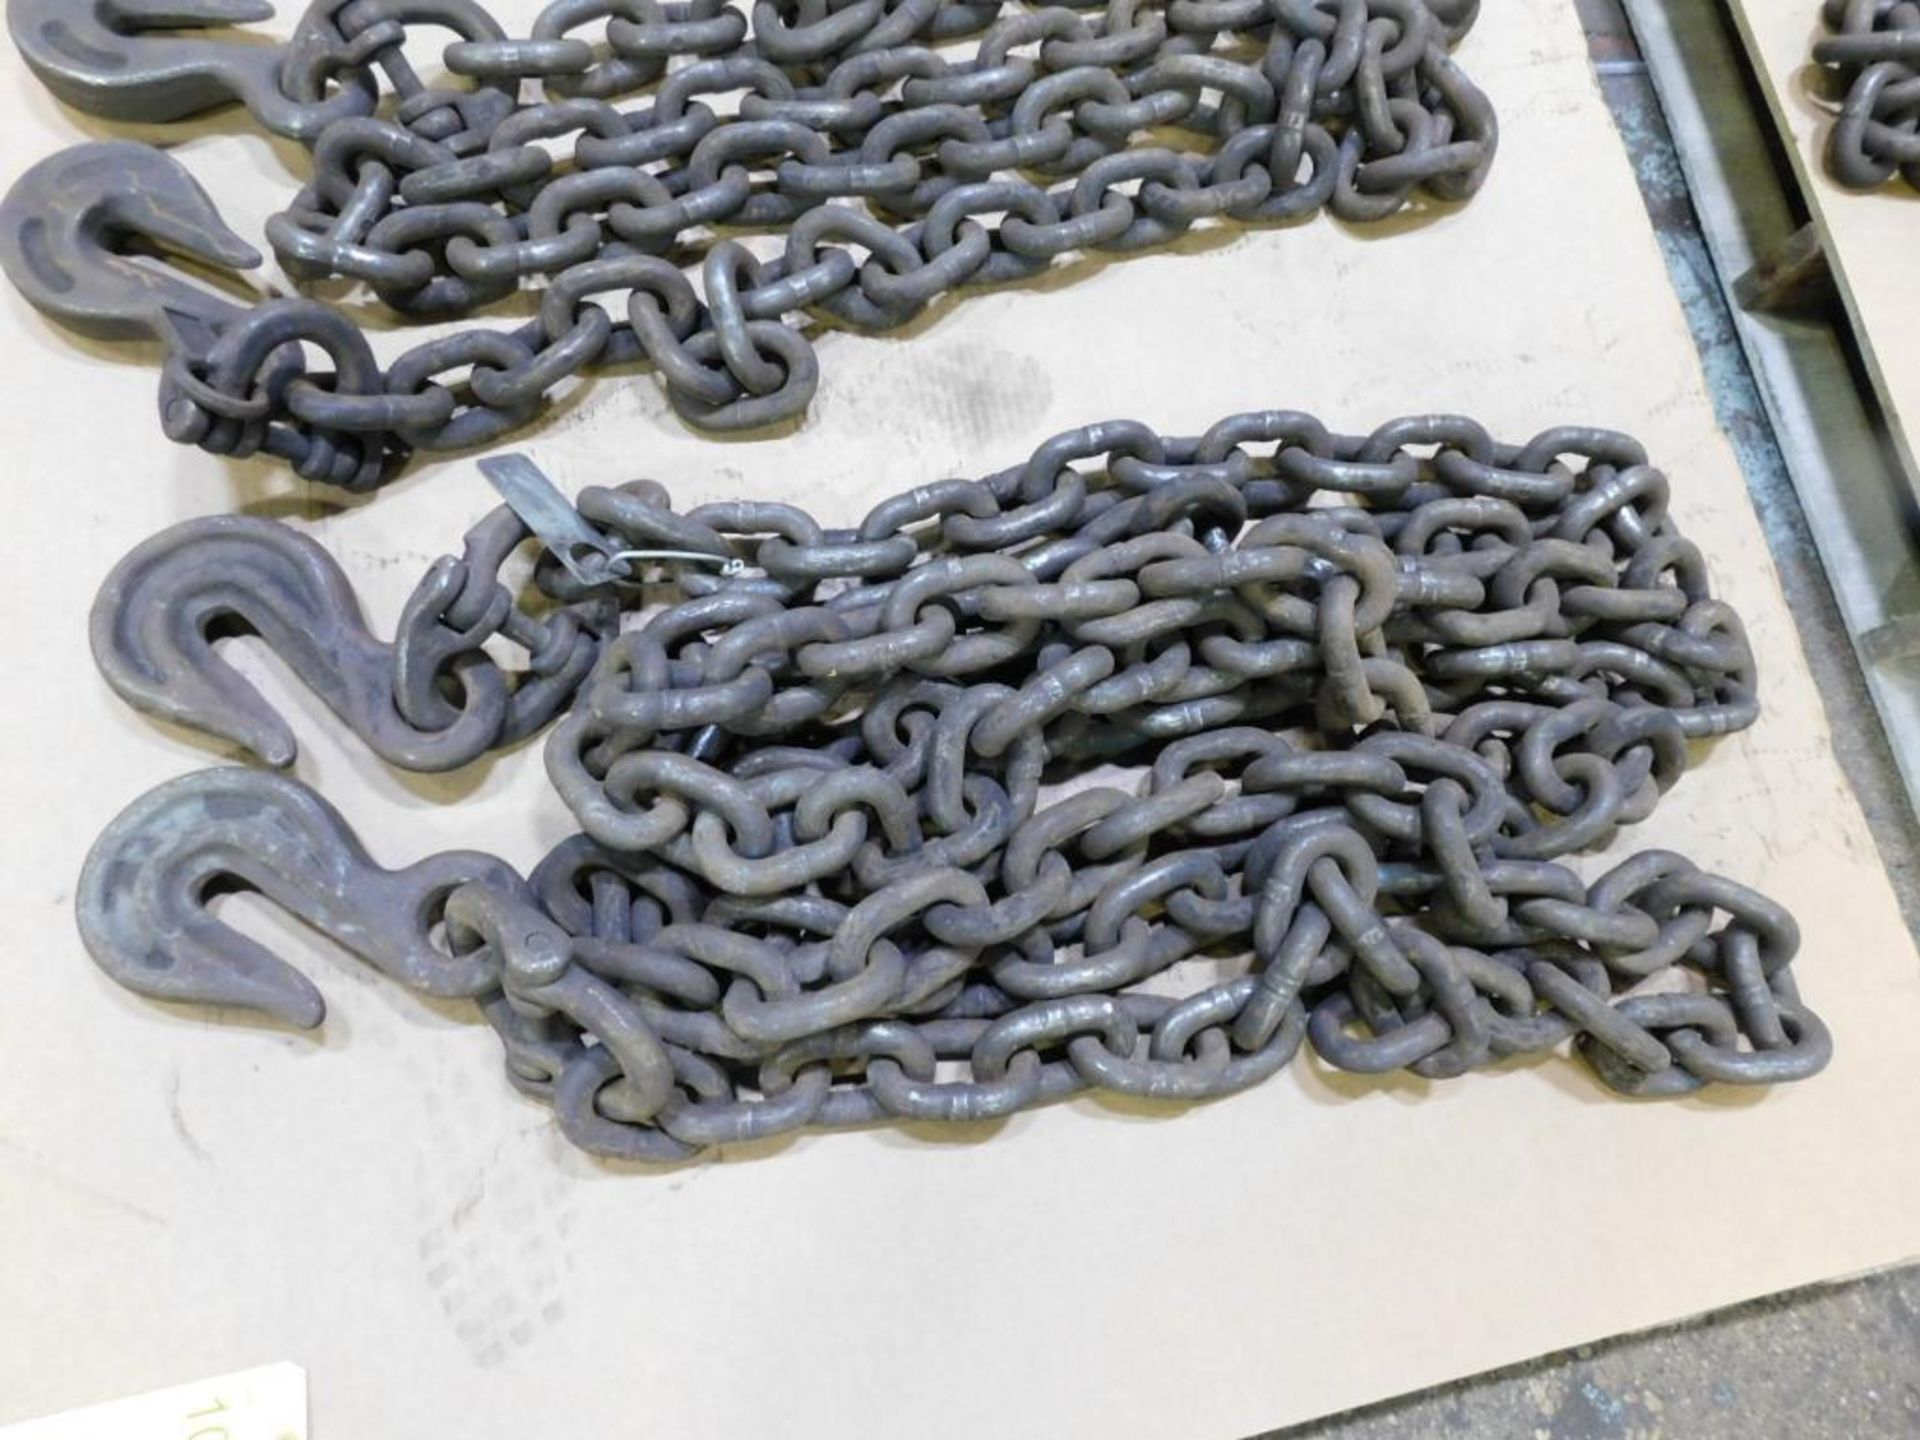 LOT: (1) 28,300 Lb. Double Hook Lifting Chain, 27' Length, Size 3/4", (1) 28,300 Lb. Double Hook Lif - Image 2 of 8